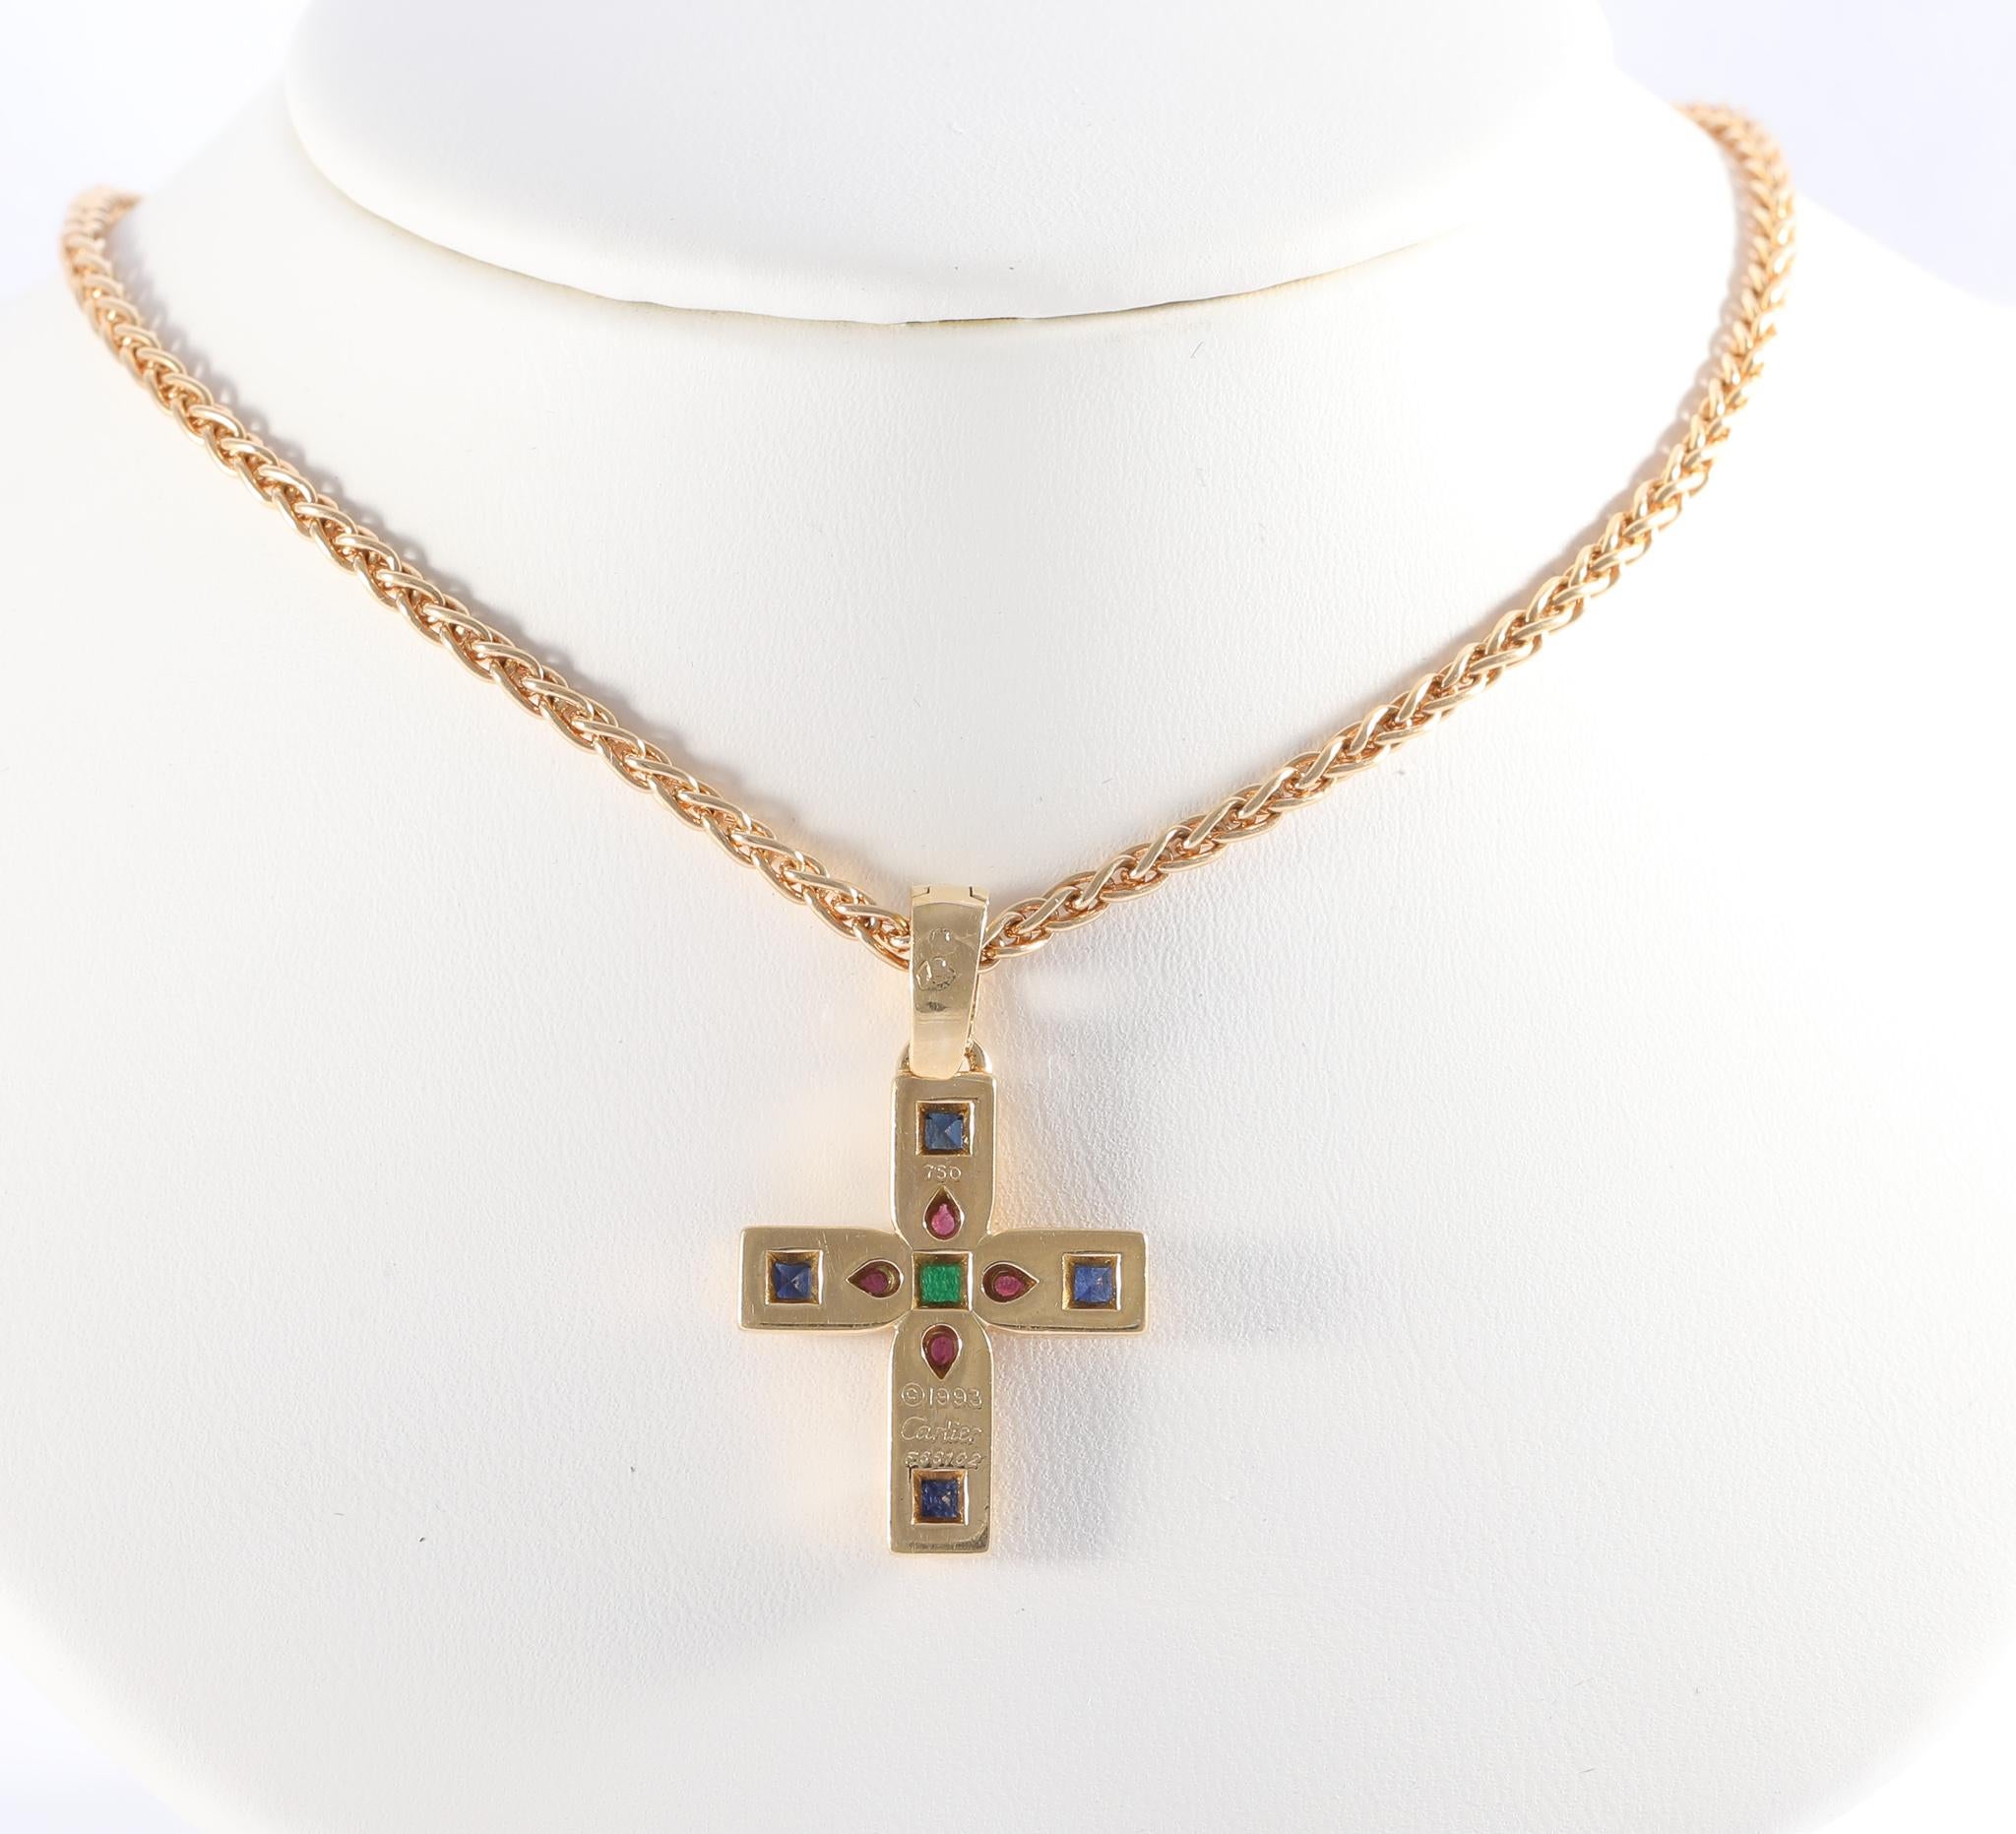 Cartier multi gemstone cross pendant featuring sapphires, rubies, and emerald, set in 18 karat yellow gold, suspended from an 18 karat yellow gold 17 inch rope chain. Both pendant and chain are stamped.